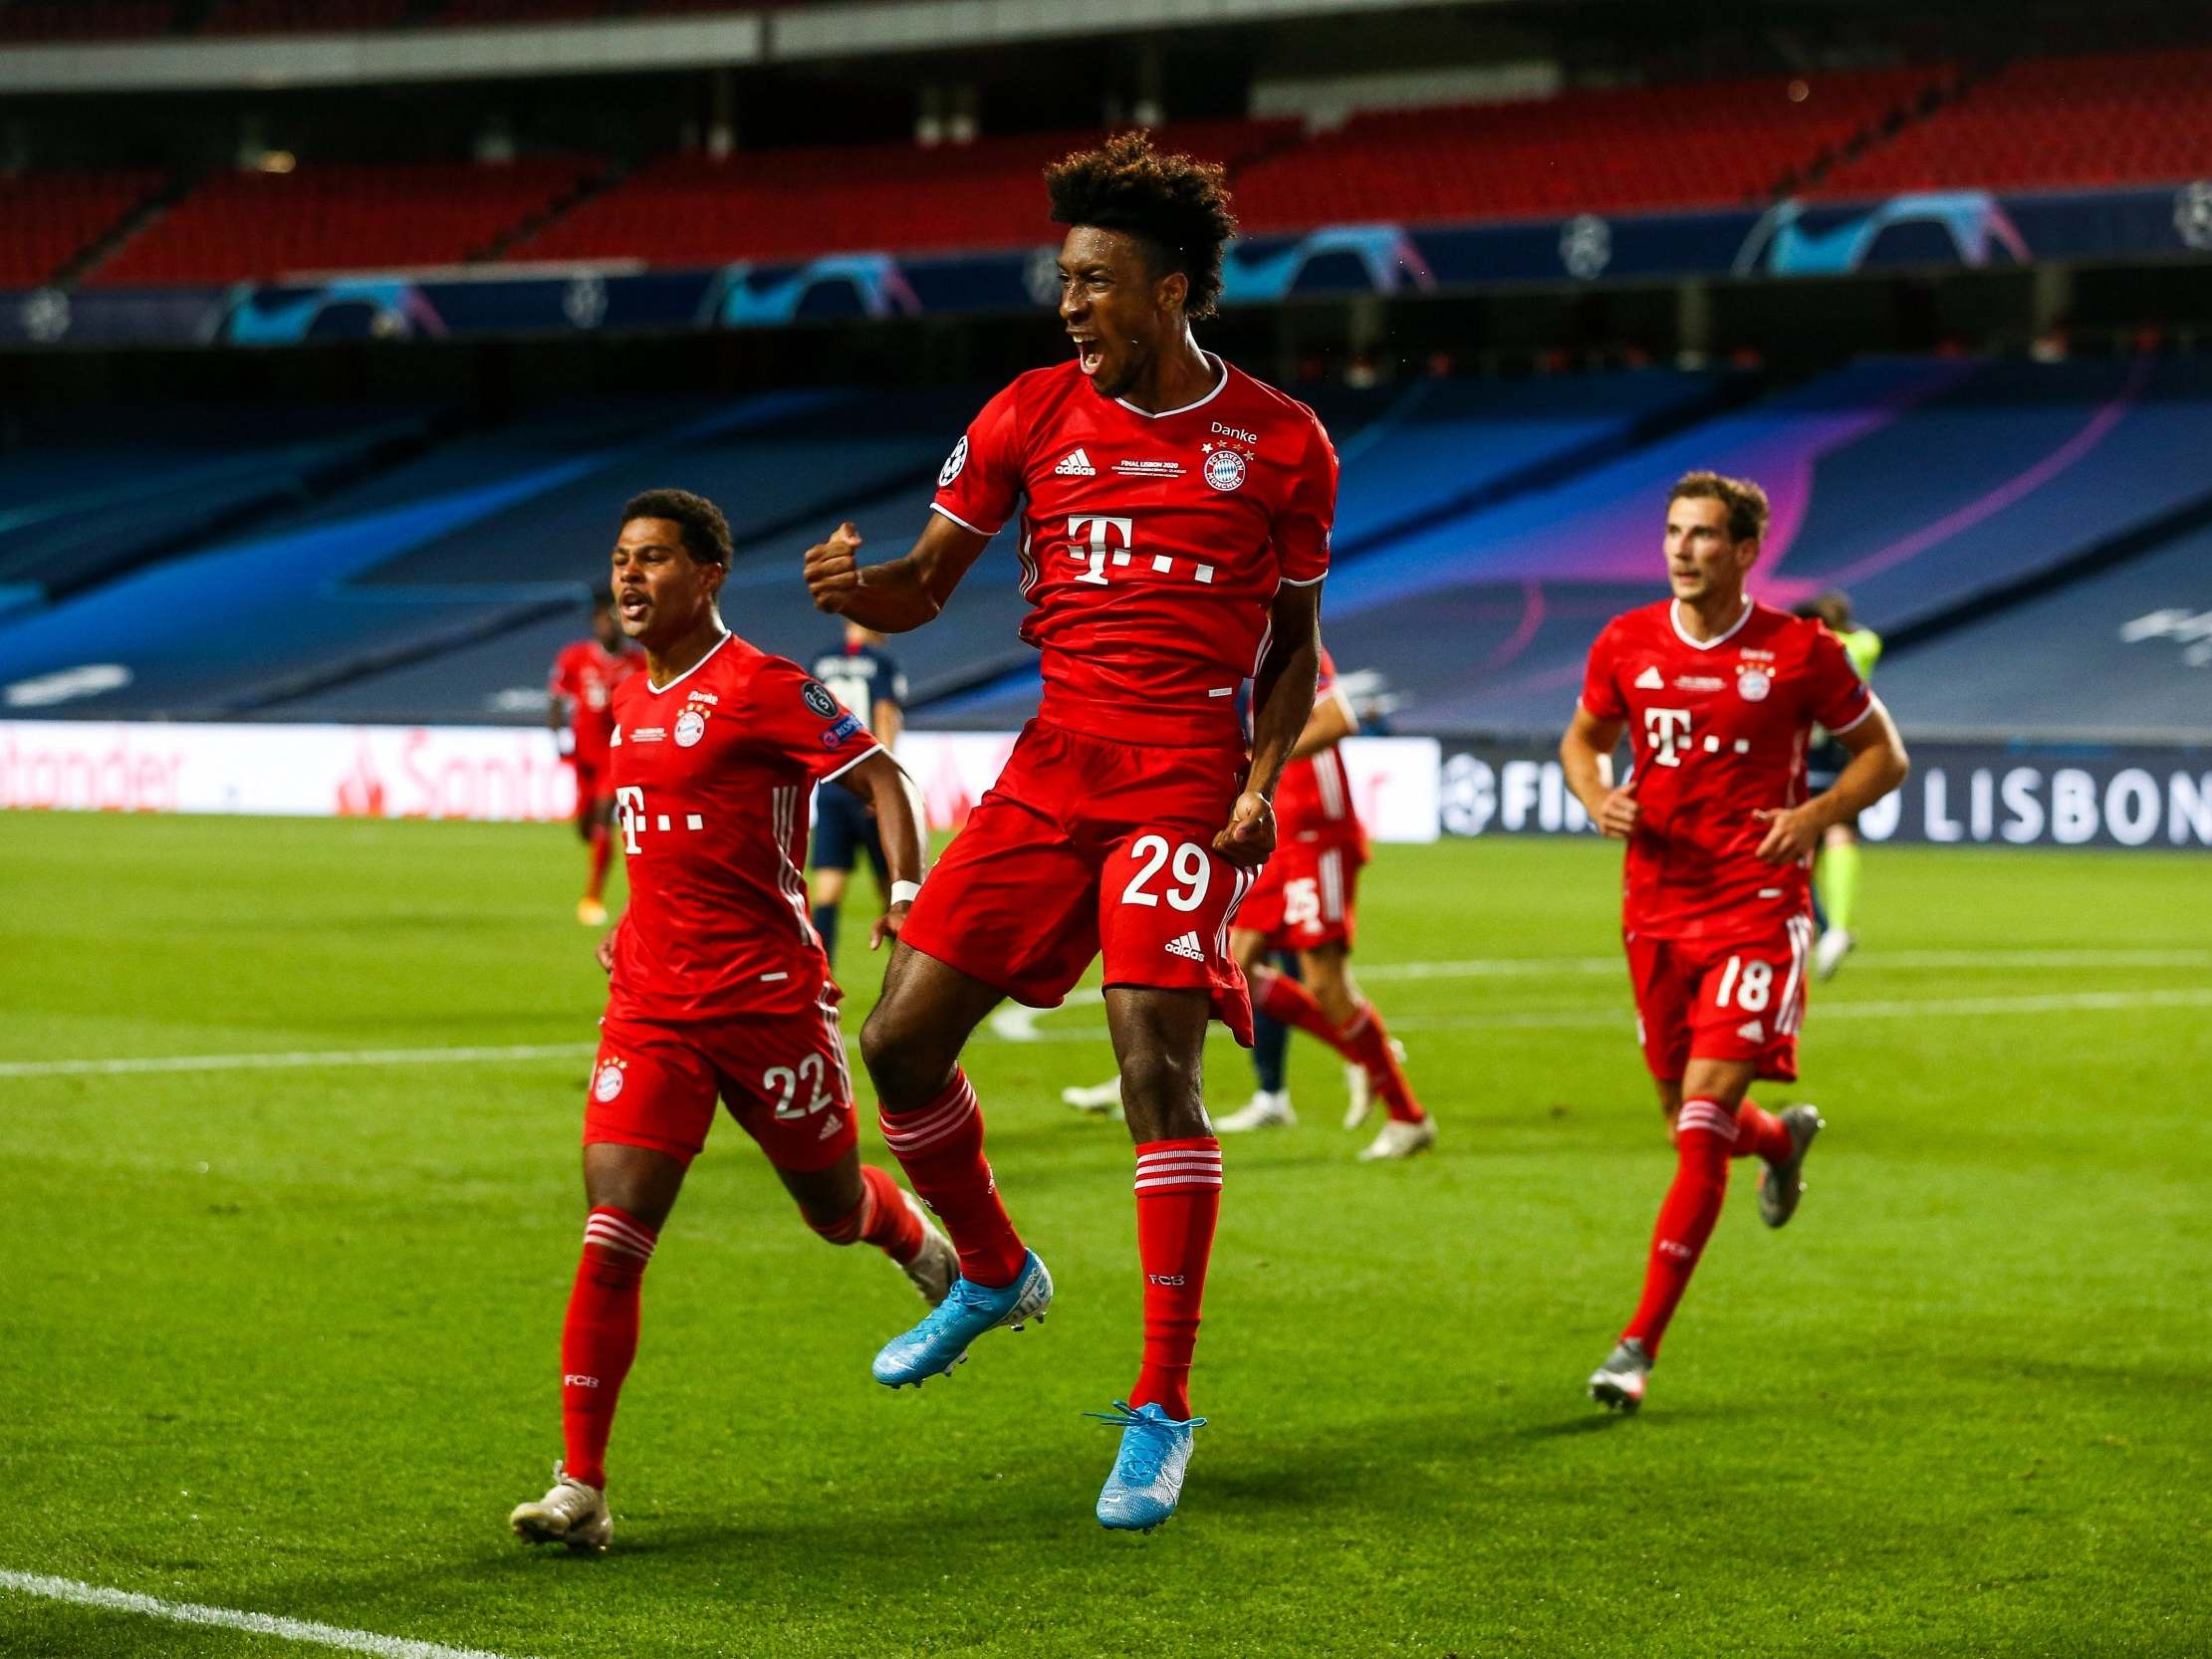 Bayern Munich win Champions League after beating PSG in final